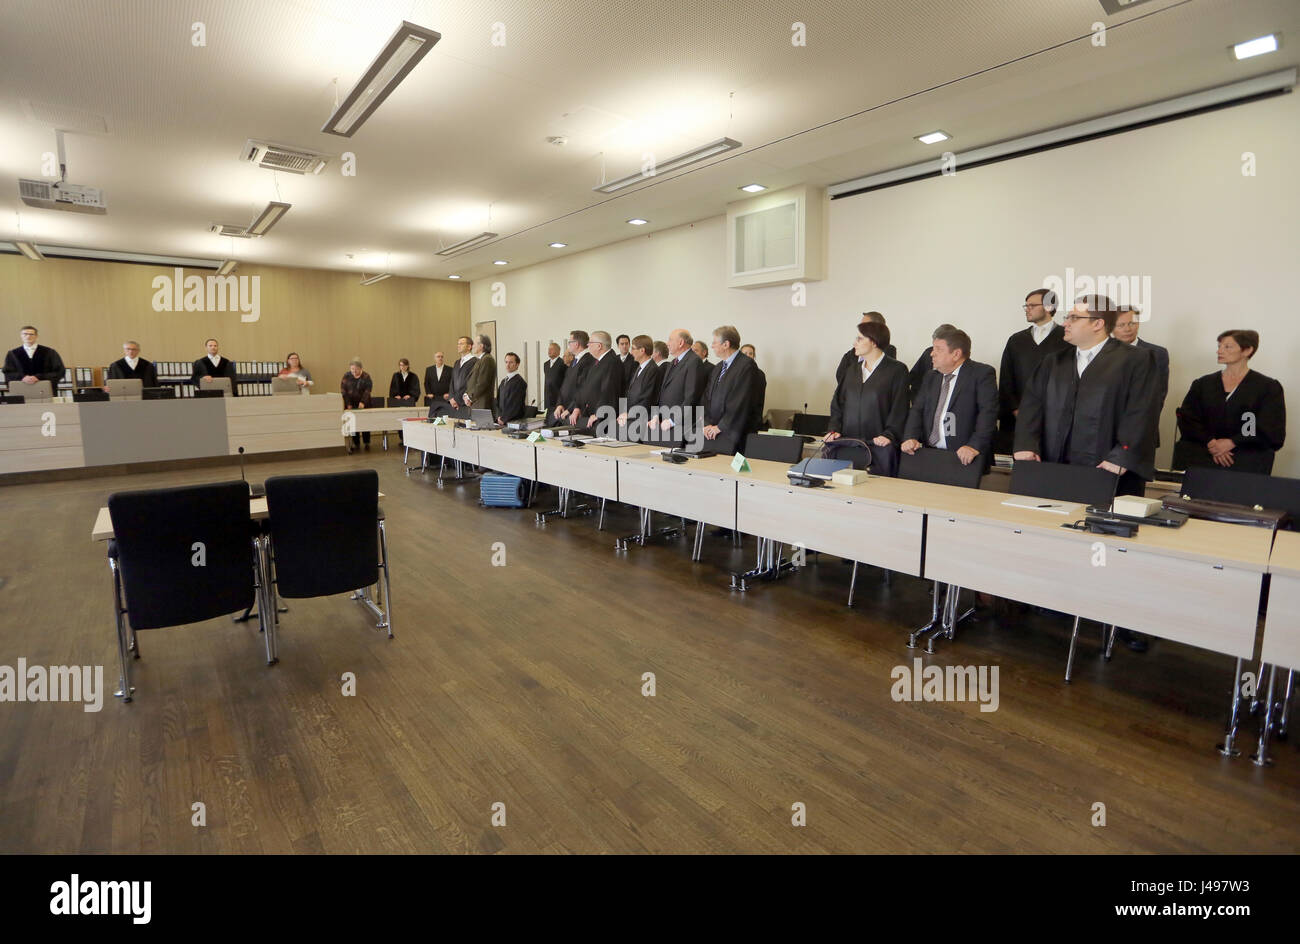 Essen, Germany. 11th May, 2017. The defendants (r) with their lawyers, including former chief executive of Arcandor AG Thomas Middelhoff (8.f.l), and the judges (l) at the start of an embezzlement trial at the regional court in Essen, Germany, 11 May 2017. Photo: Ina Fassbender/dpa/Alamy Live News Stock Photo